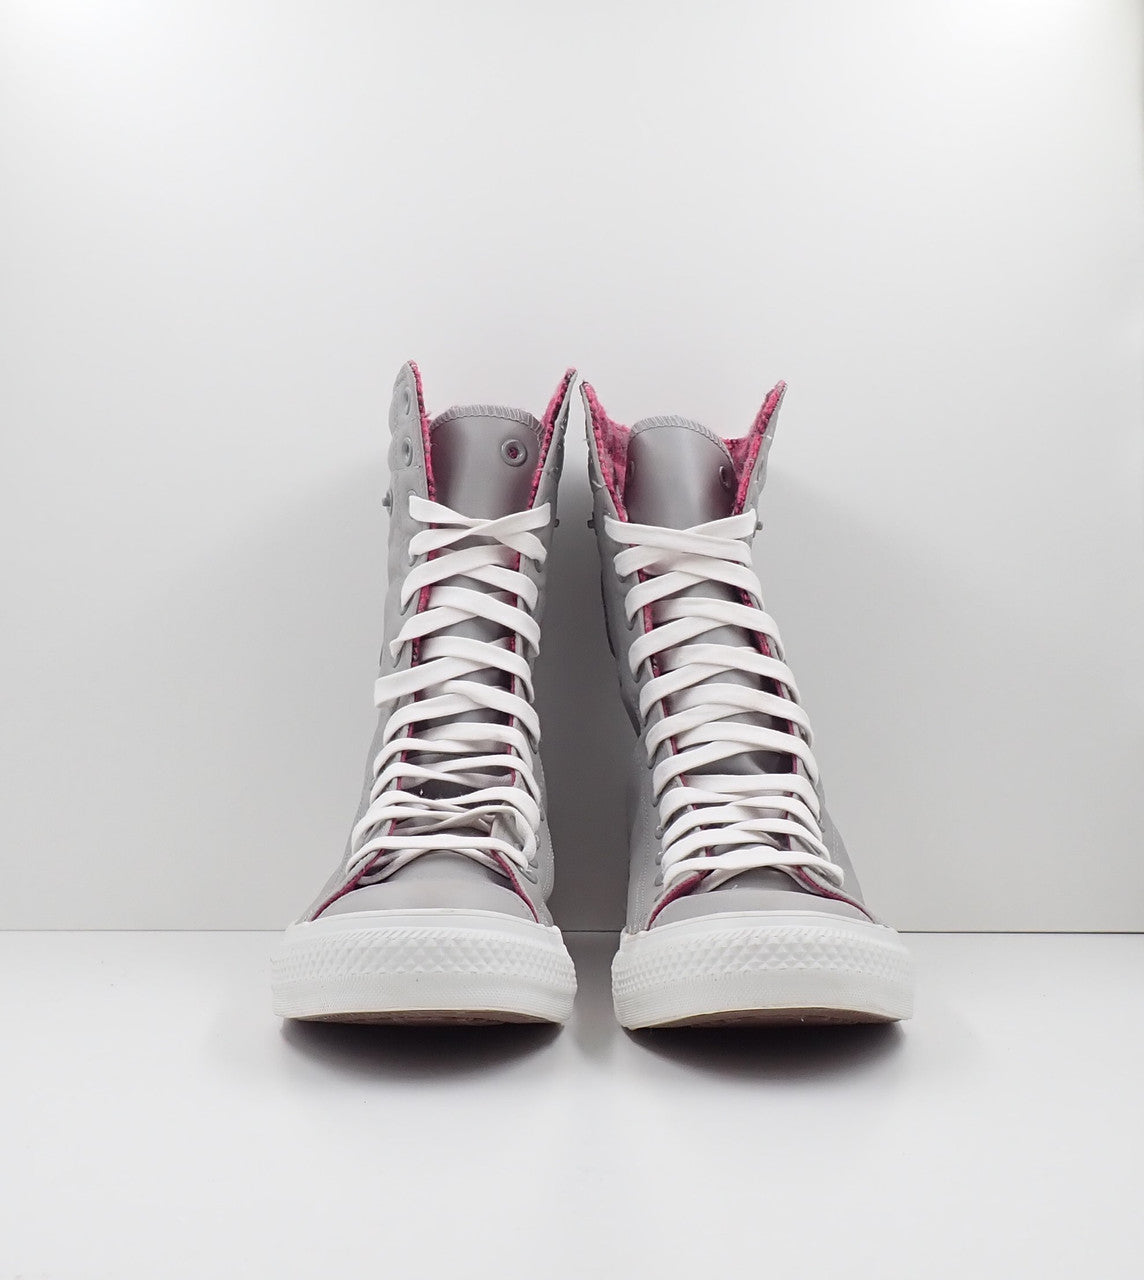 Converse Chuck Taylor All Star High Leather Grey/Pink